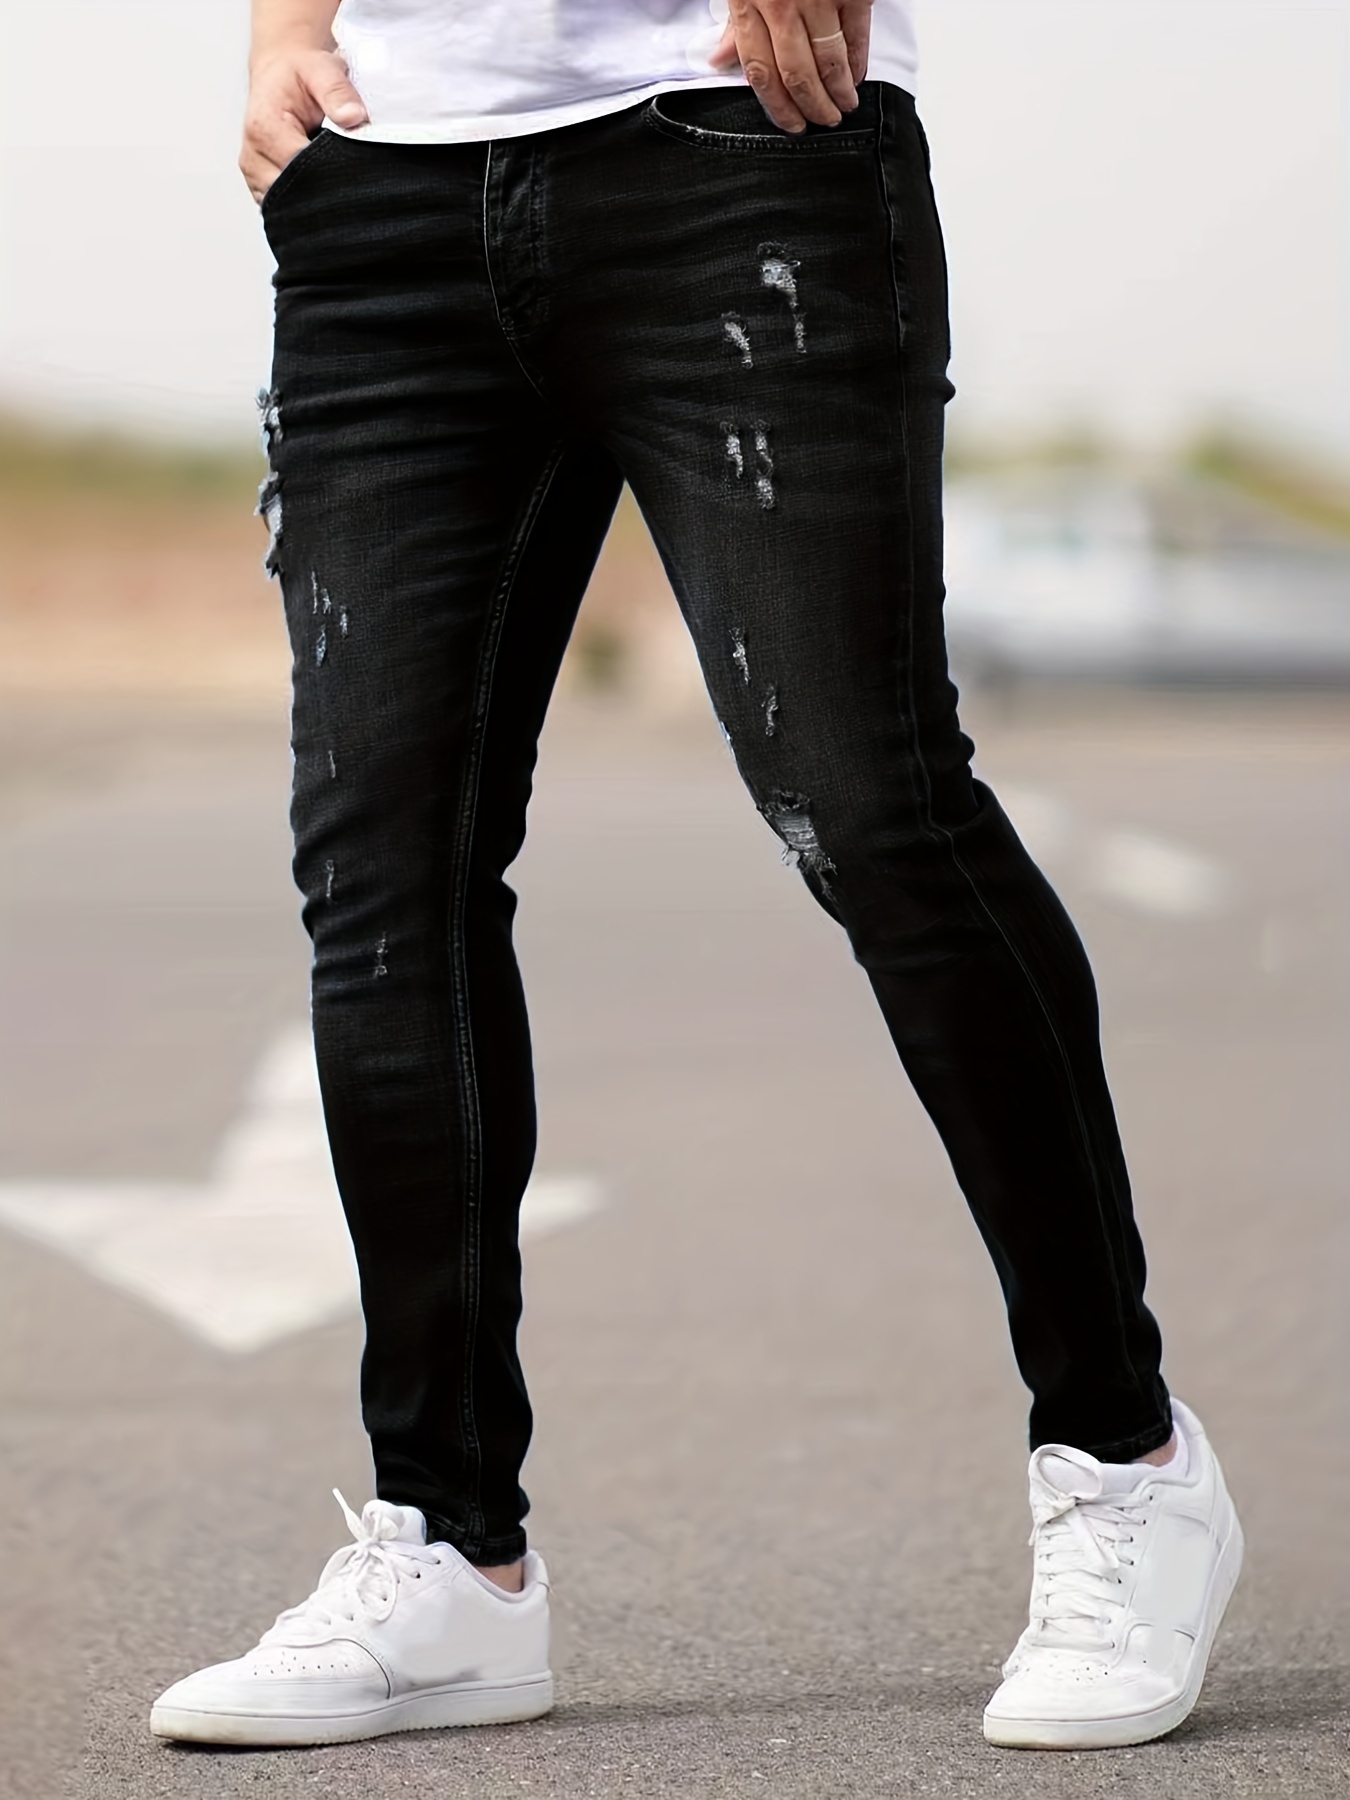 Mens Ripped Distressed Skinny Jeans Denim Pants Casual Stretch Slim Fit  Trousers